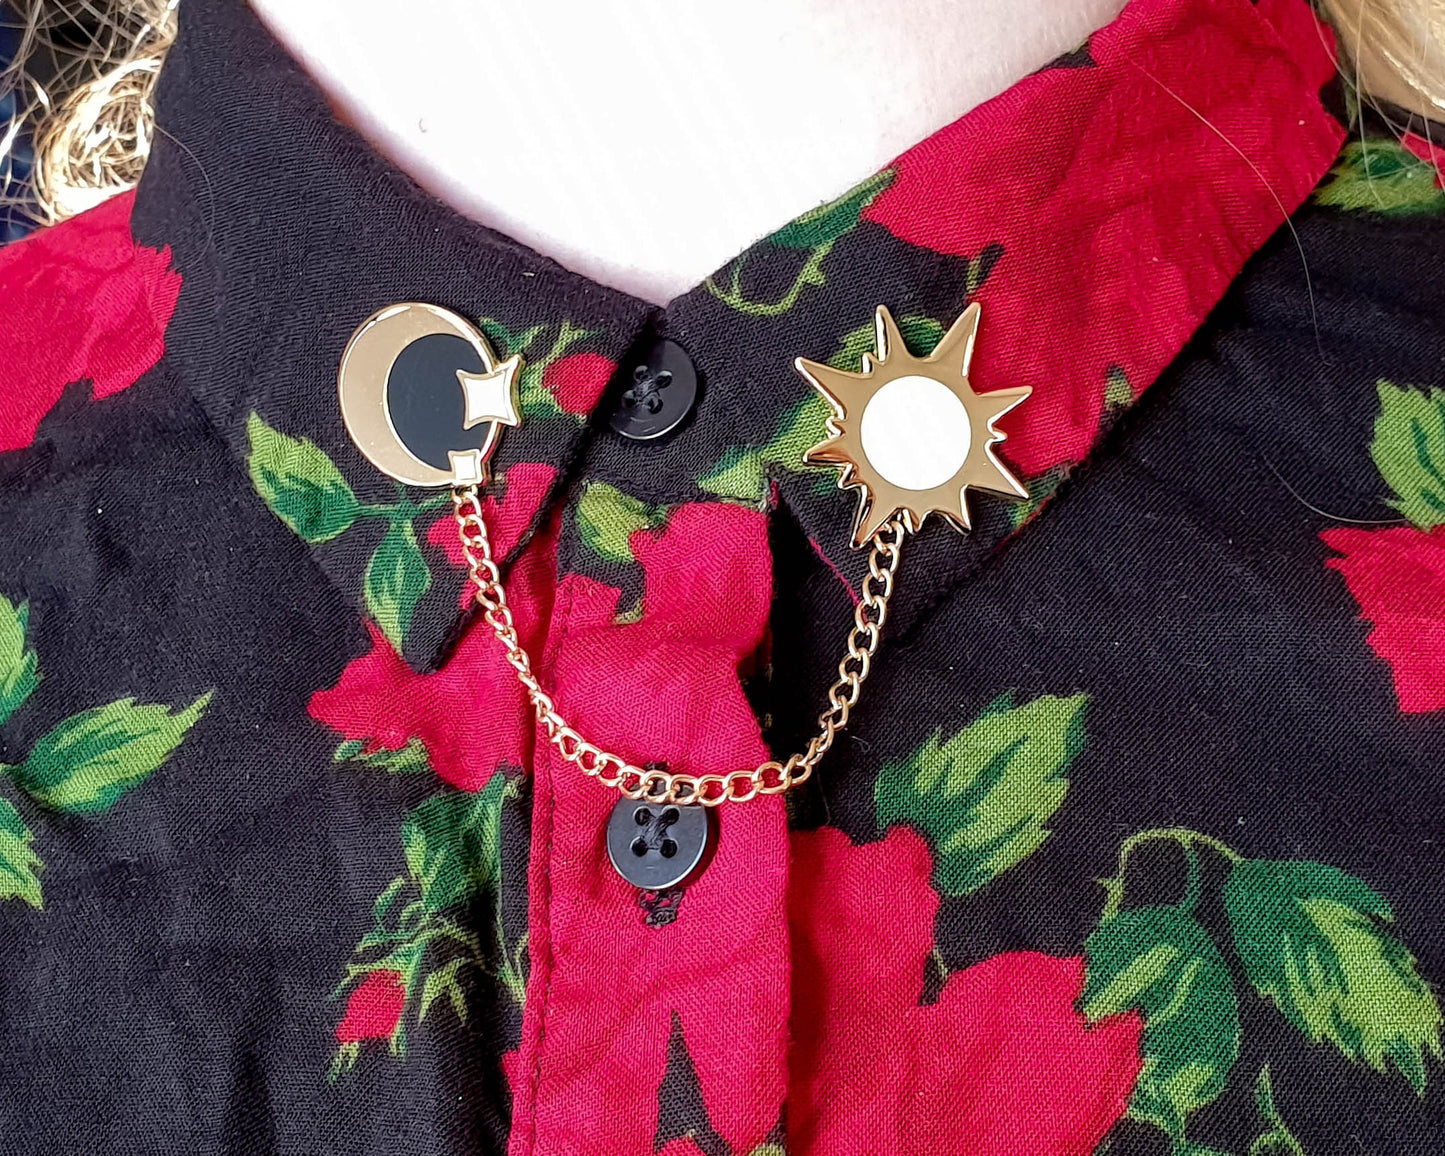 Sun And Moon Collar Pins - Hard Enamel Pin Set - Star-crossed Lovers (Collaboration by Astermorn and Annadrawsstuff)